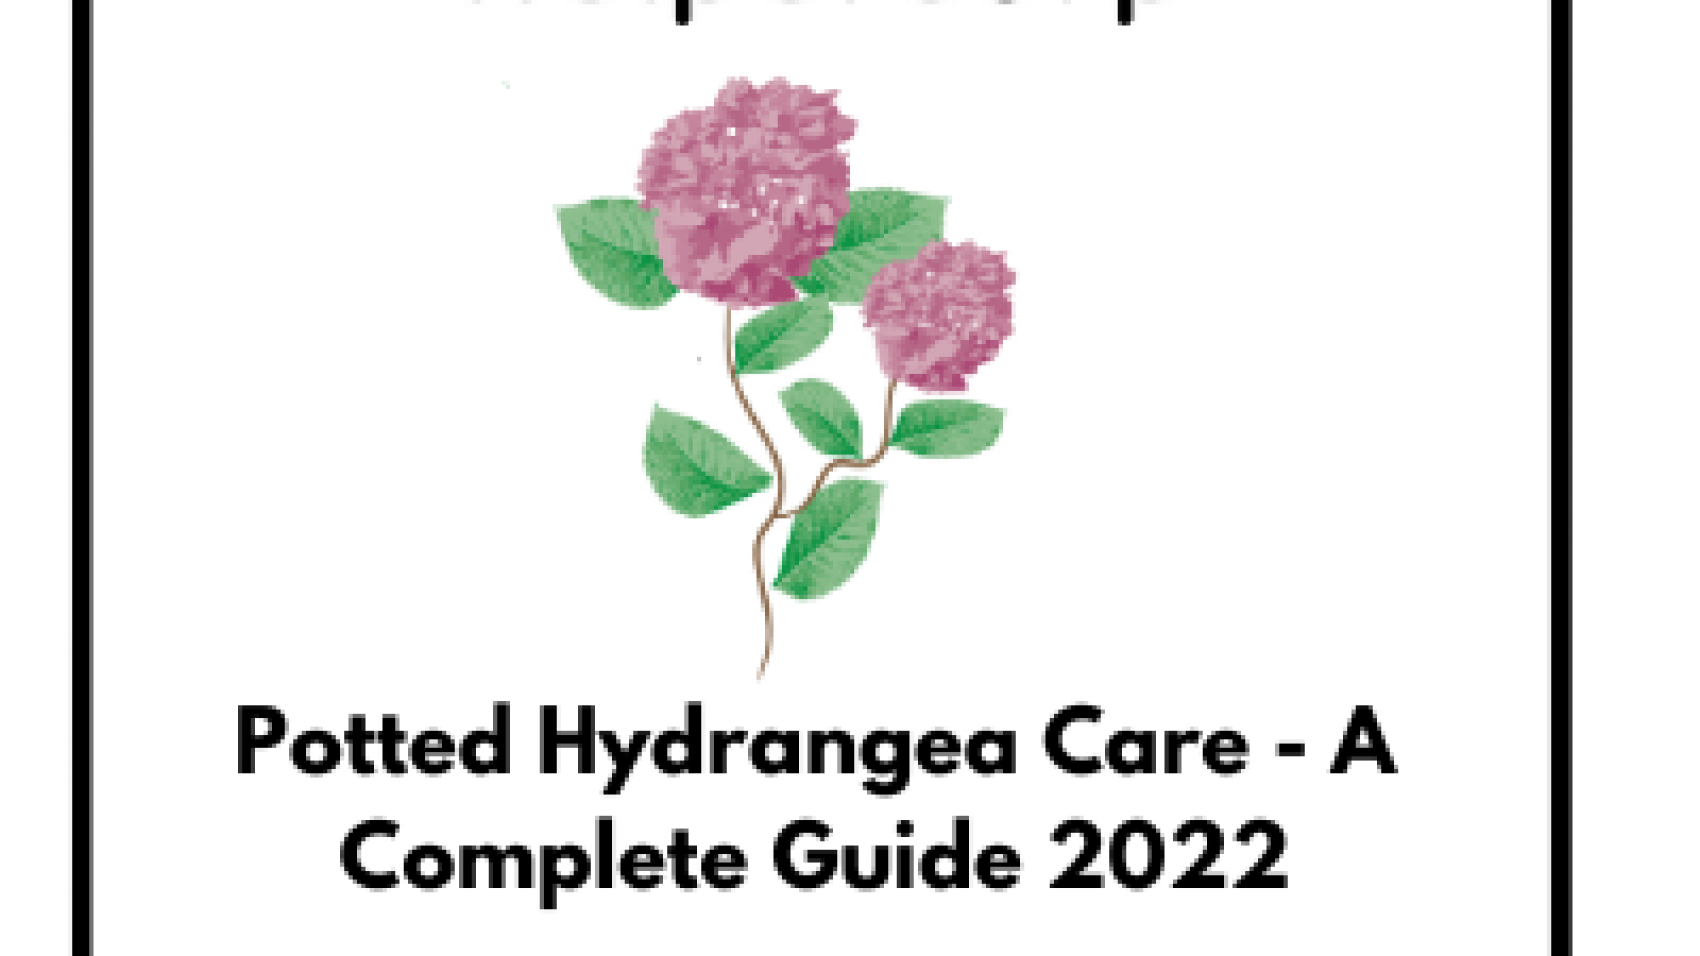 Potted-Hydrangea-Care-A-Complete-Guide-2022-2